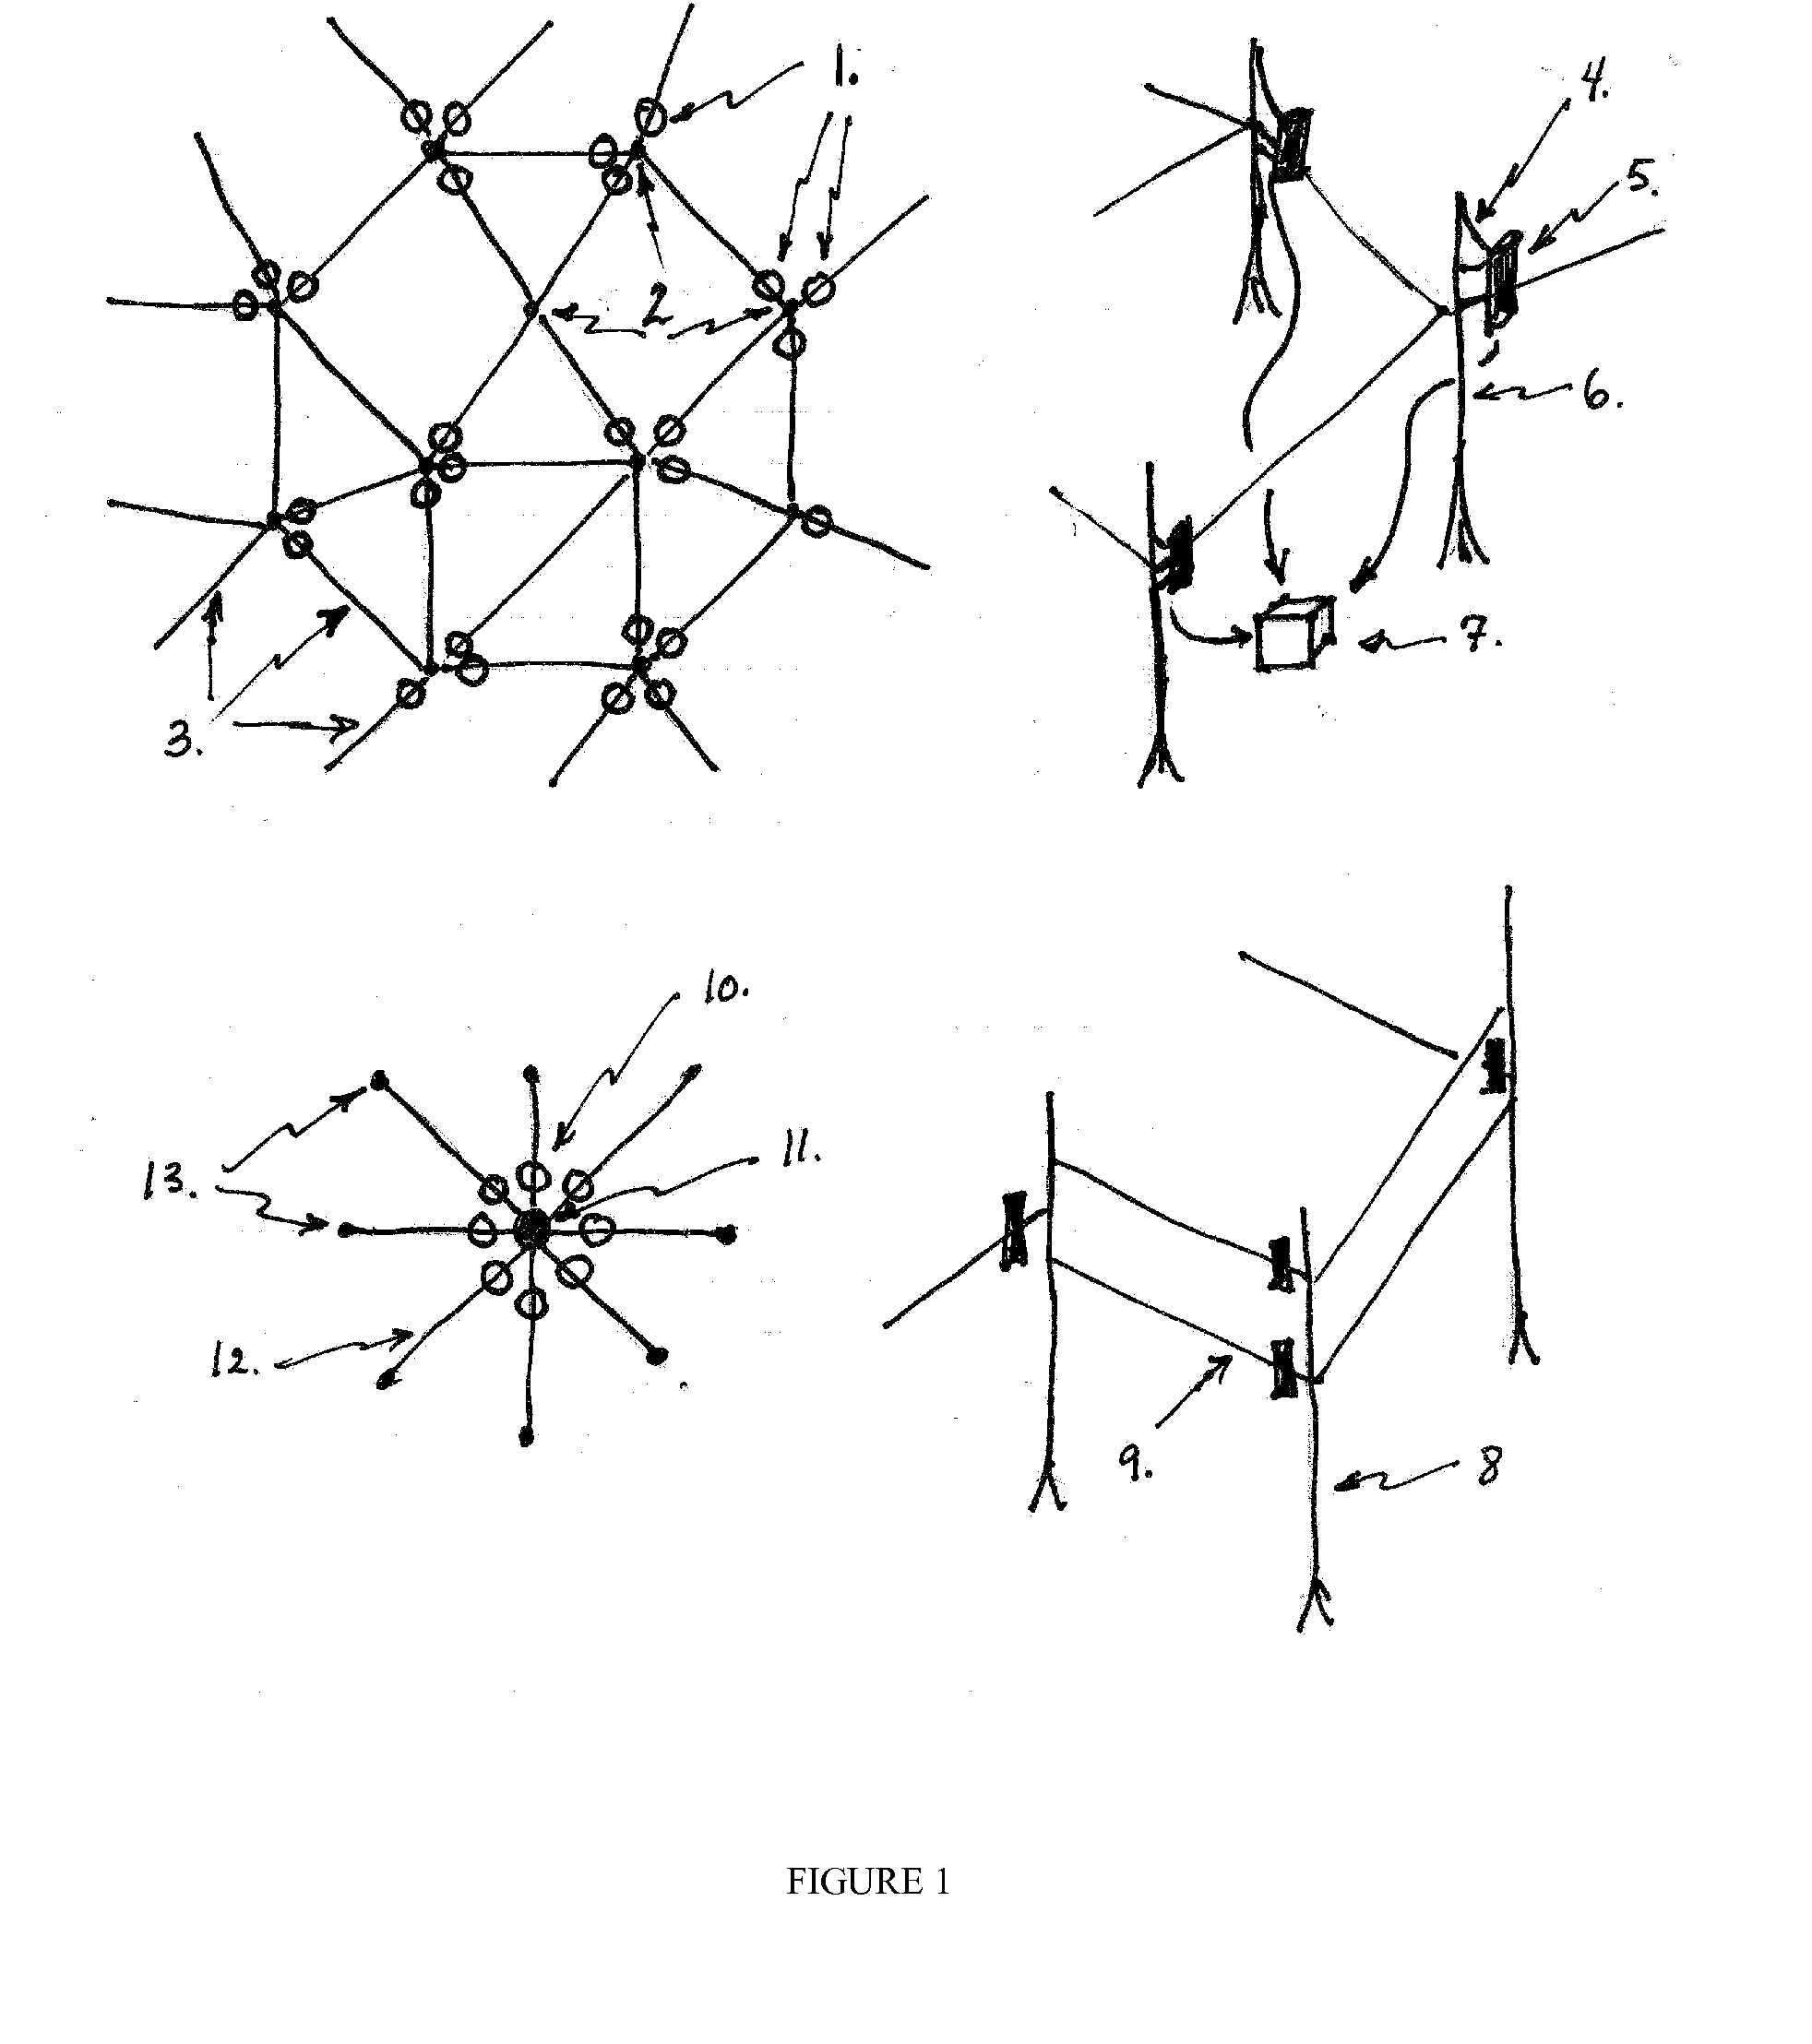 Distributed system of electrical generators utilizing wind driven natural motion of trees